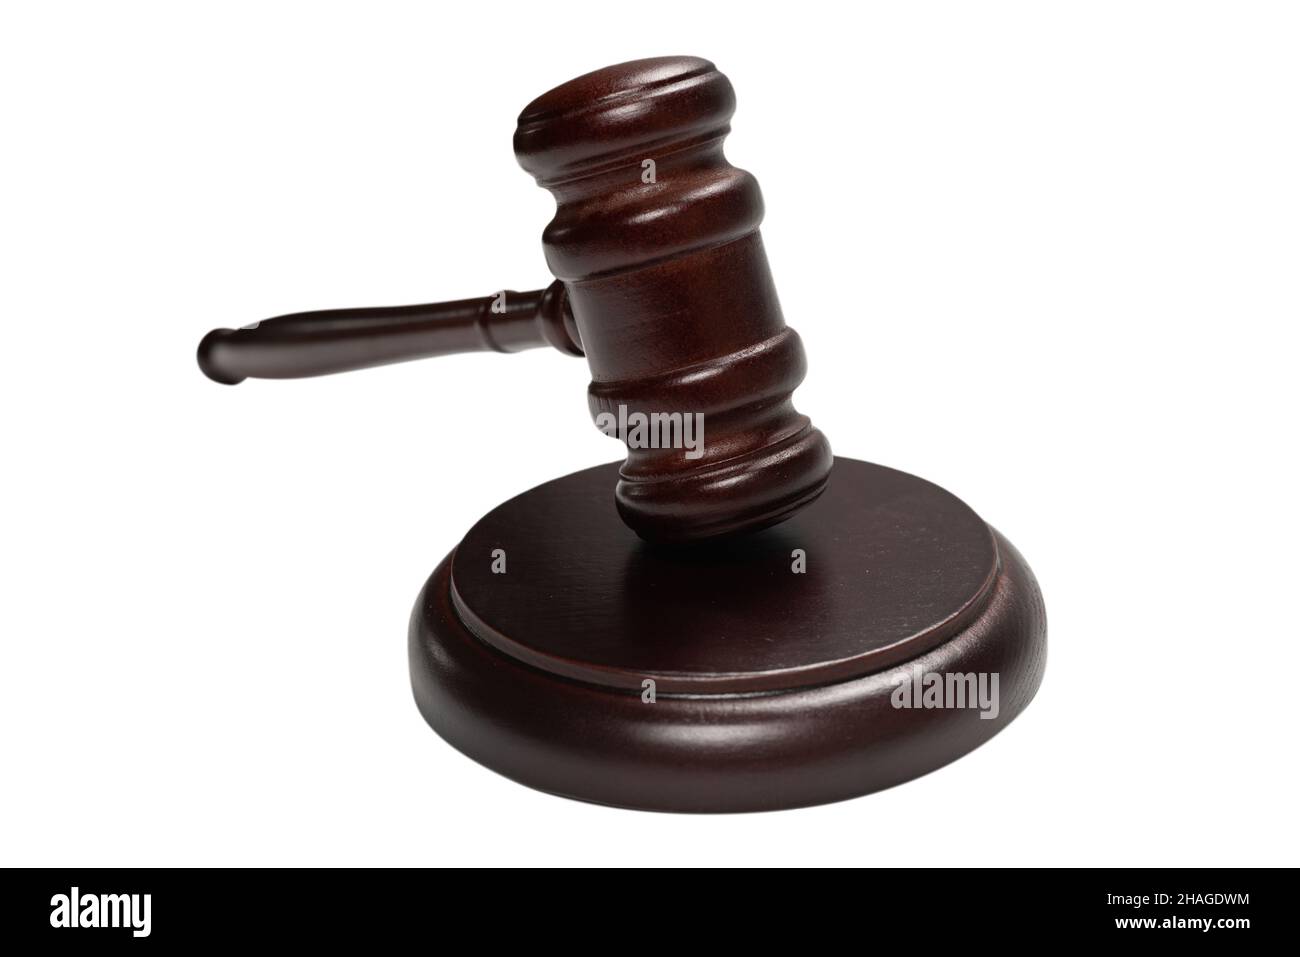 Wooden judge gavel and soundboard isolated on a white background. Justice of law system conceptual. Stock Photo